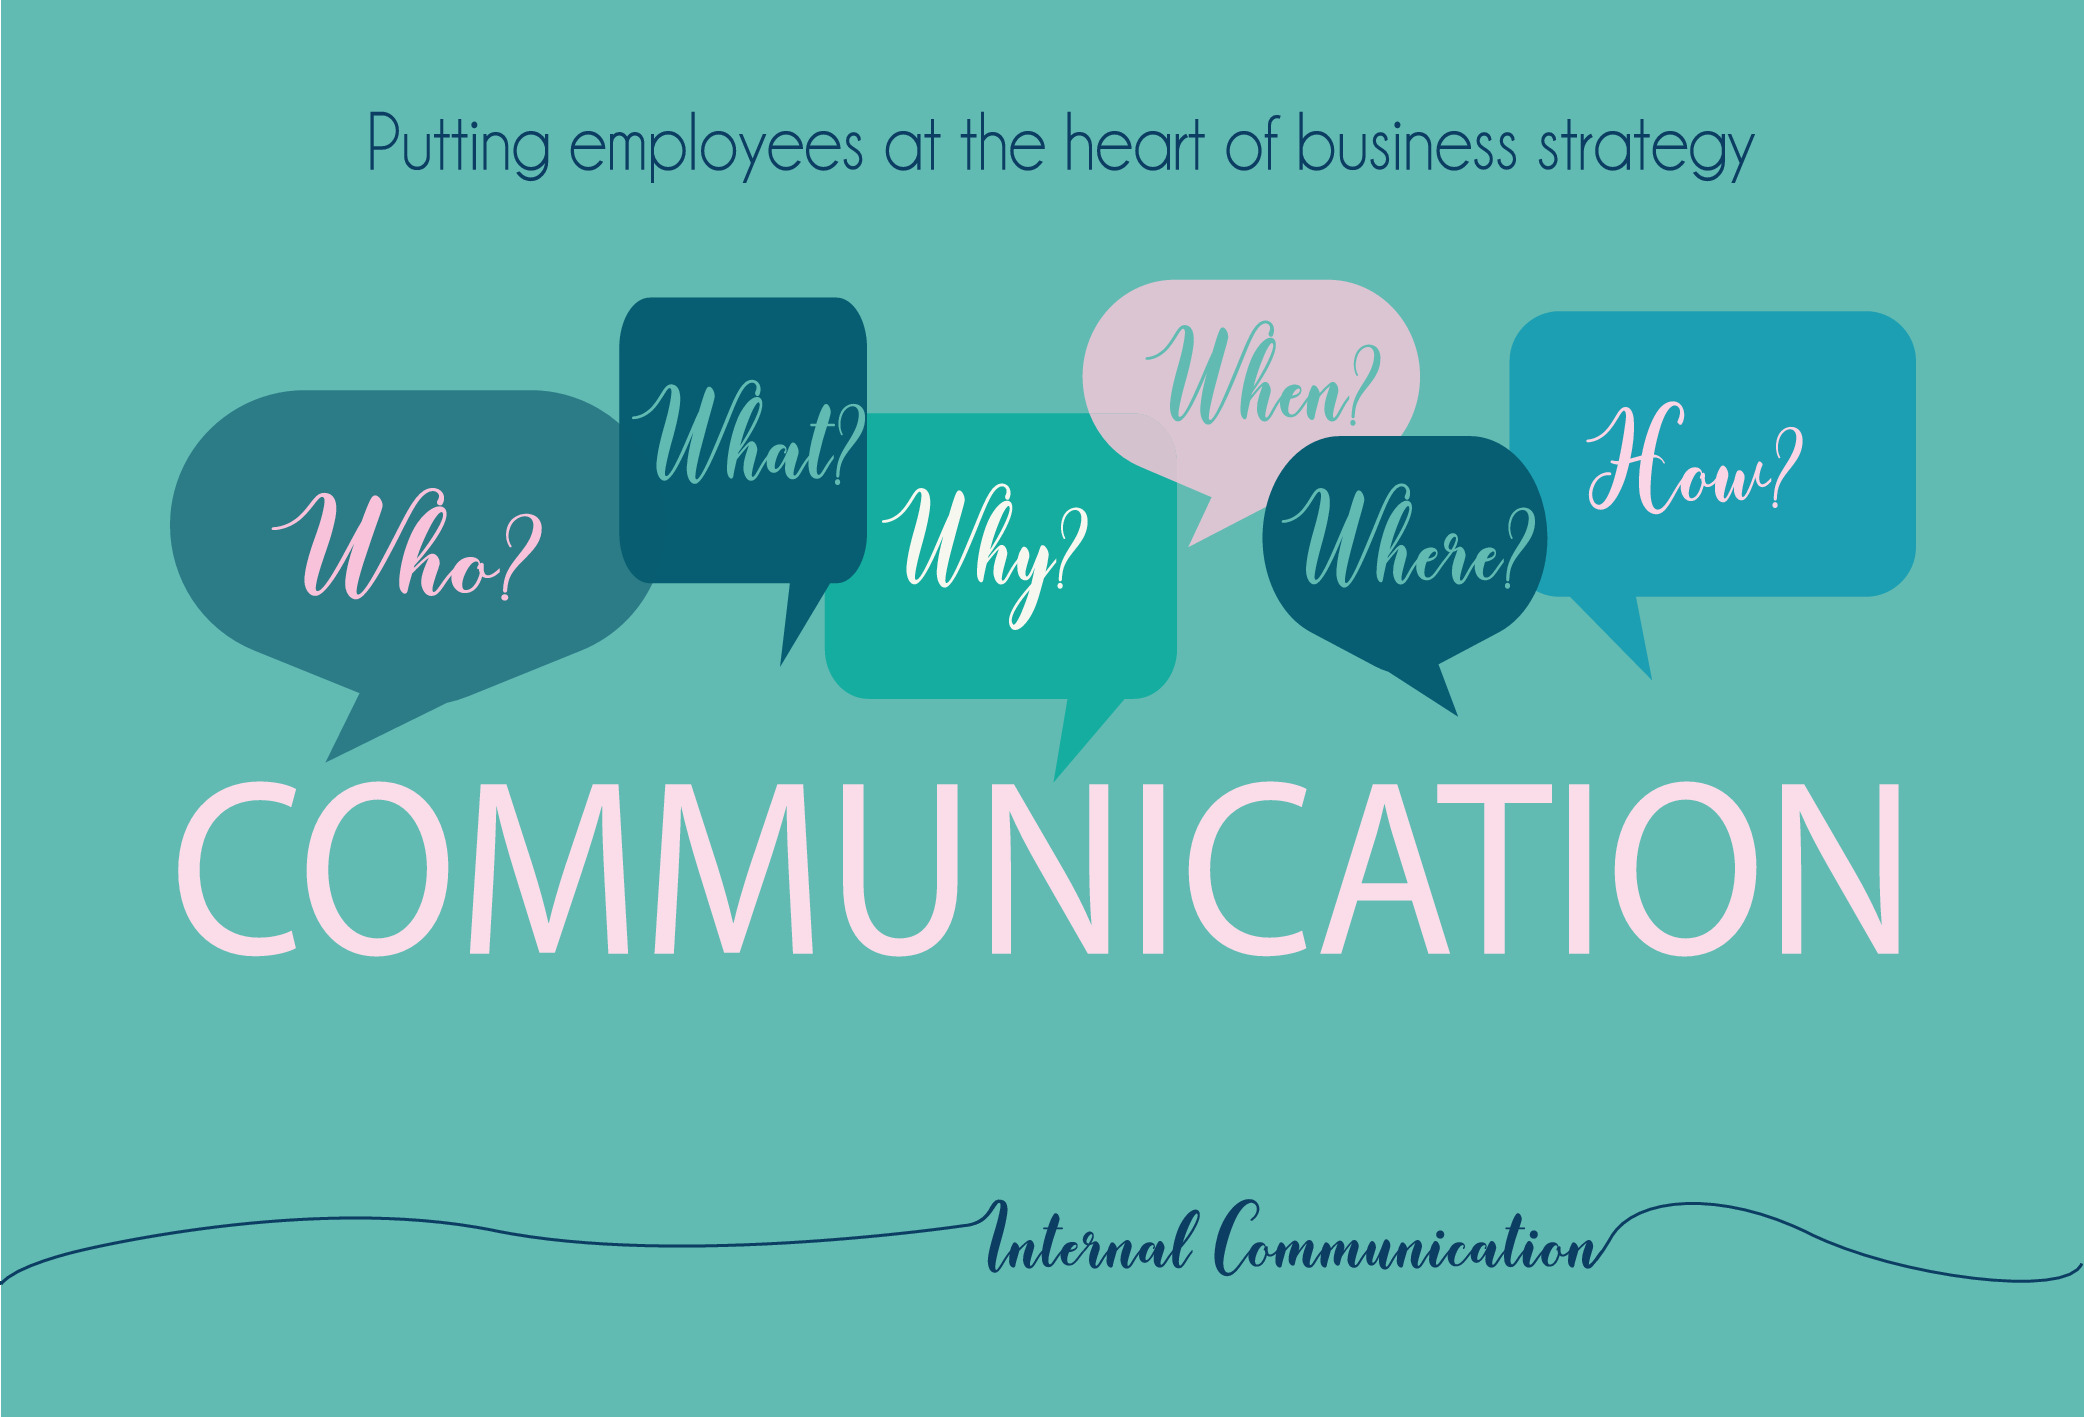 Is Anyone Listening? The importance of engaging internal communications